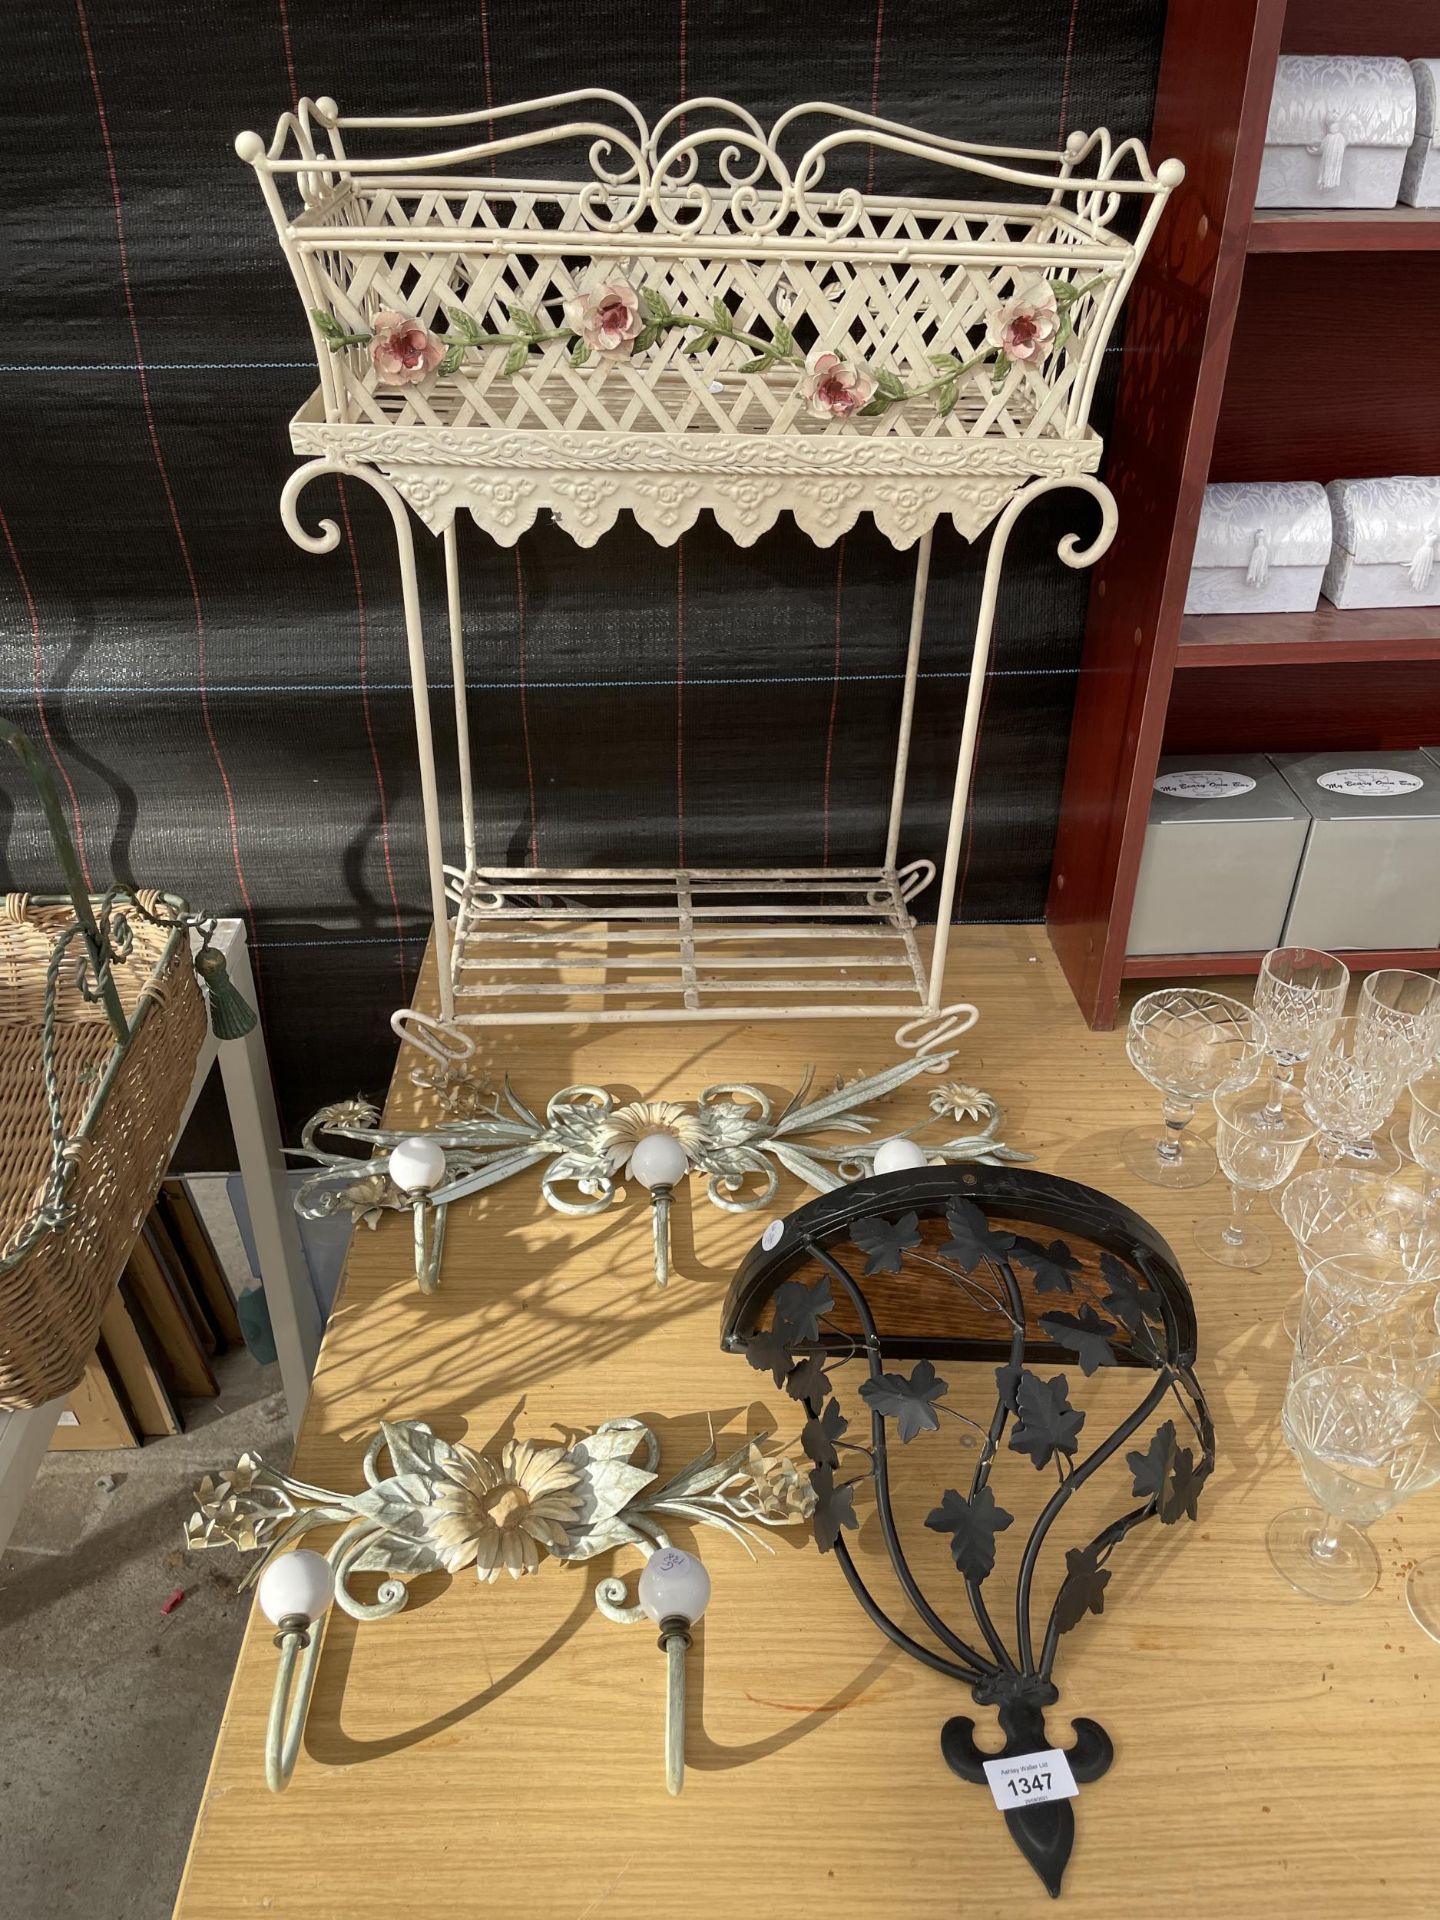 AN ASSORTMENT OF DECORATIVE PLANT ITEMS TO INCLUDE A TROUGH ON A STAND ETC